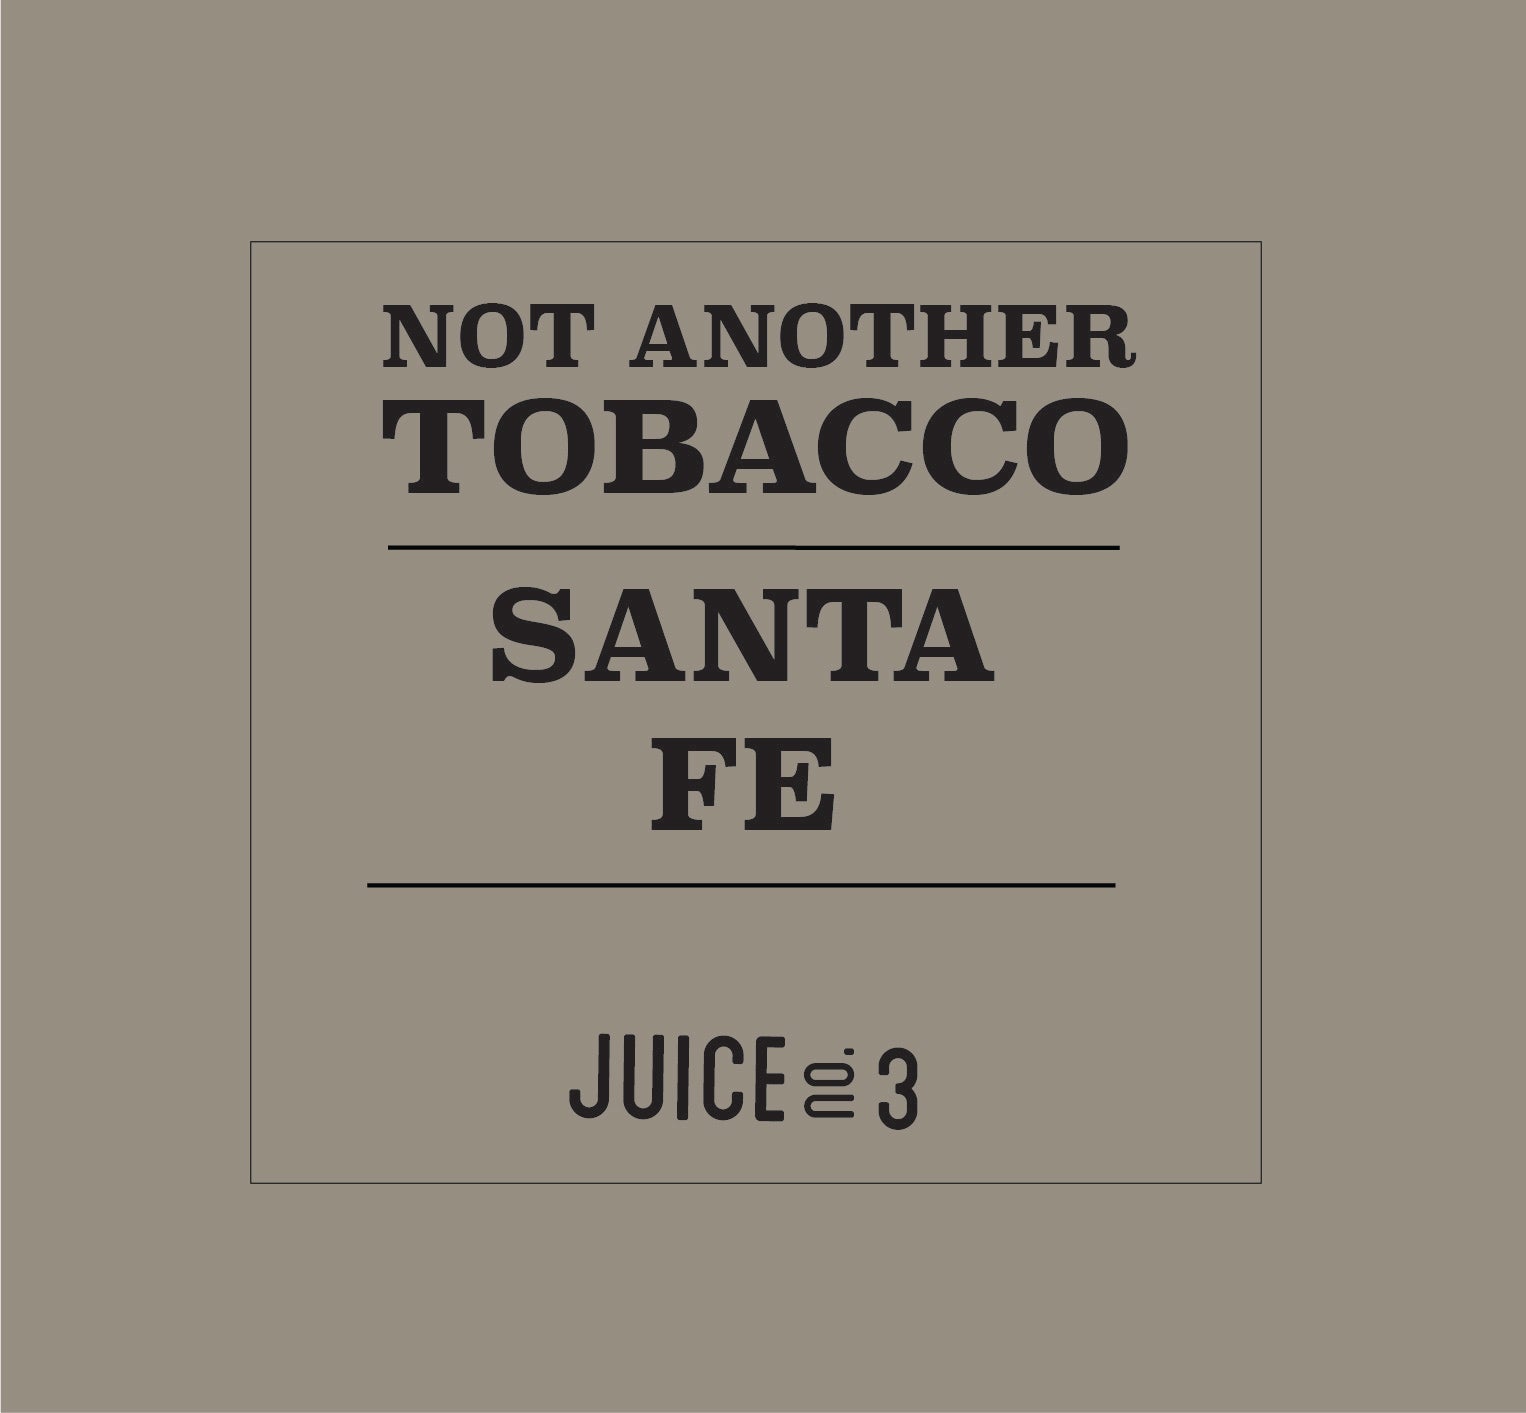 Product Spotlight: Not Another Tobacco